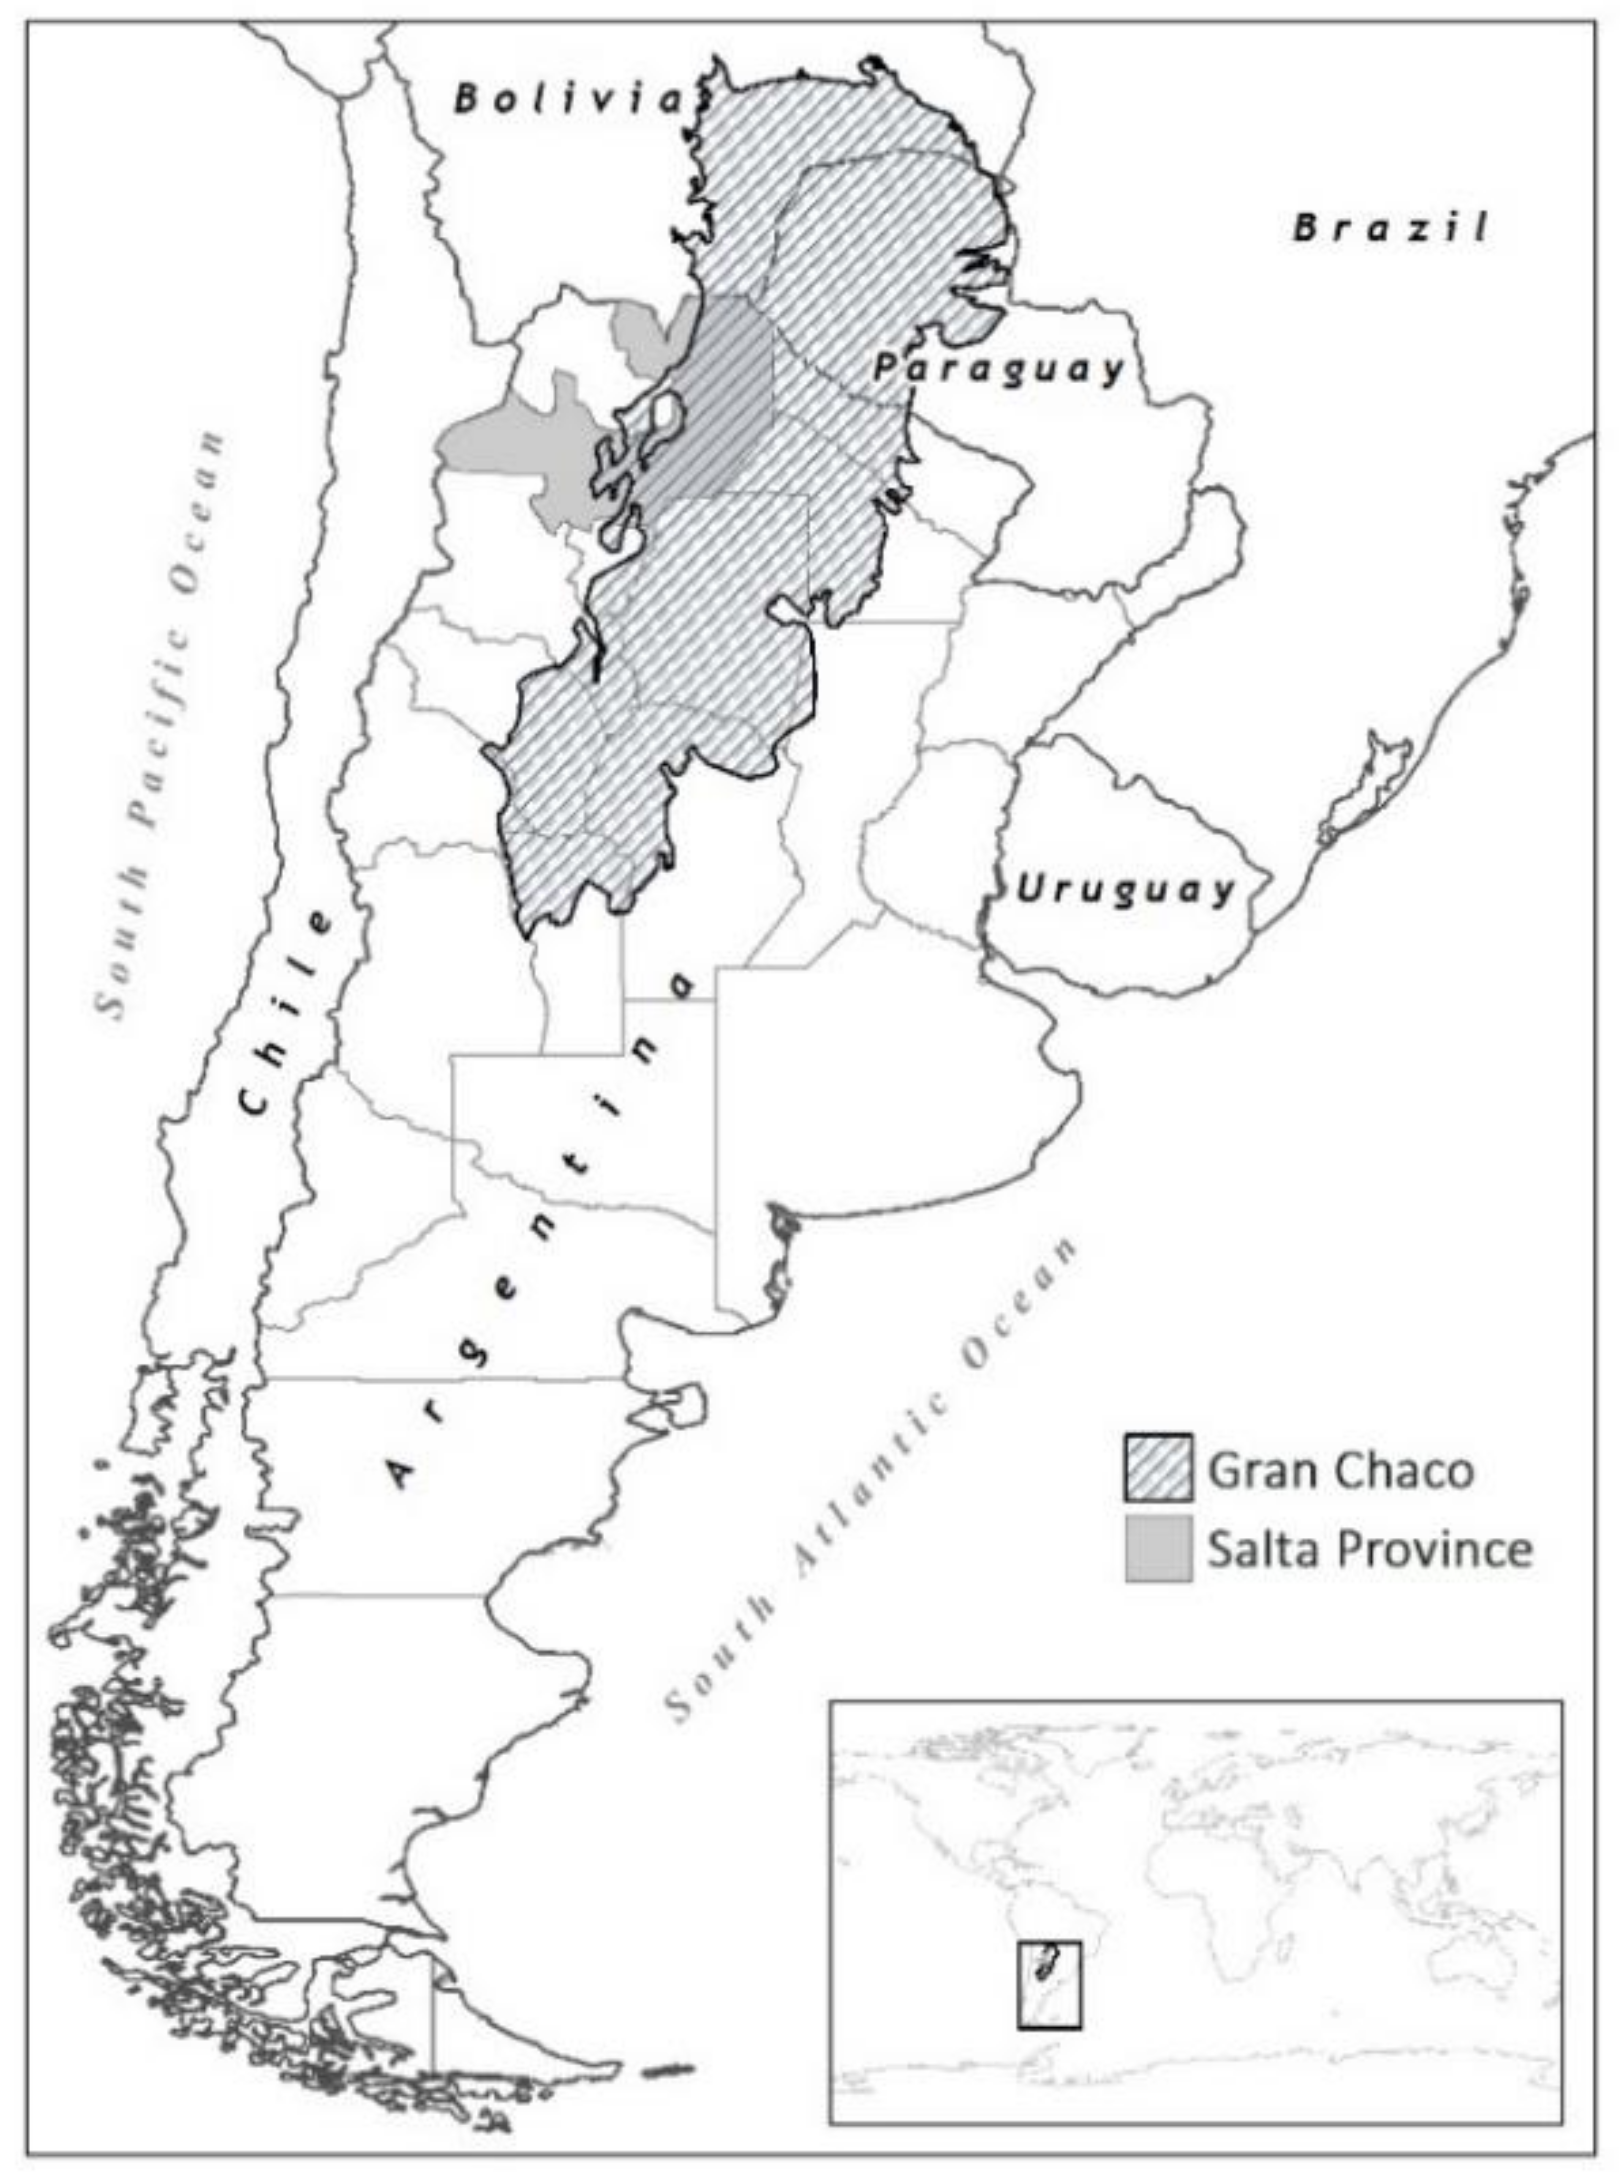 Sustainability | Free Full-Text | Land-Use Conflict in the Gran Chaco:  Finding Common Ground through Use of the Q Method